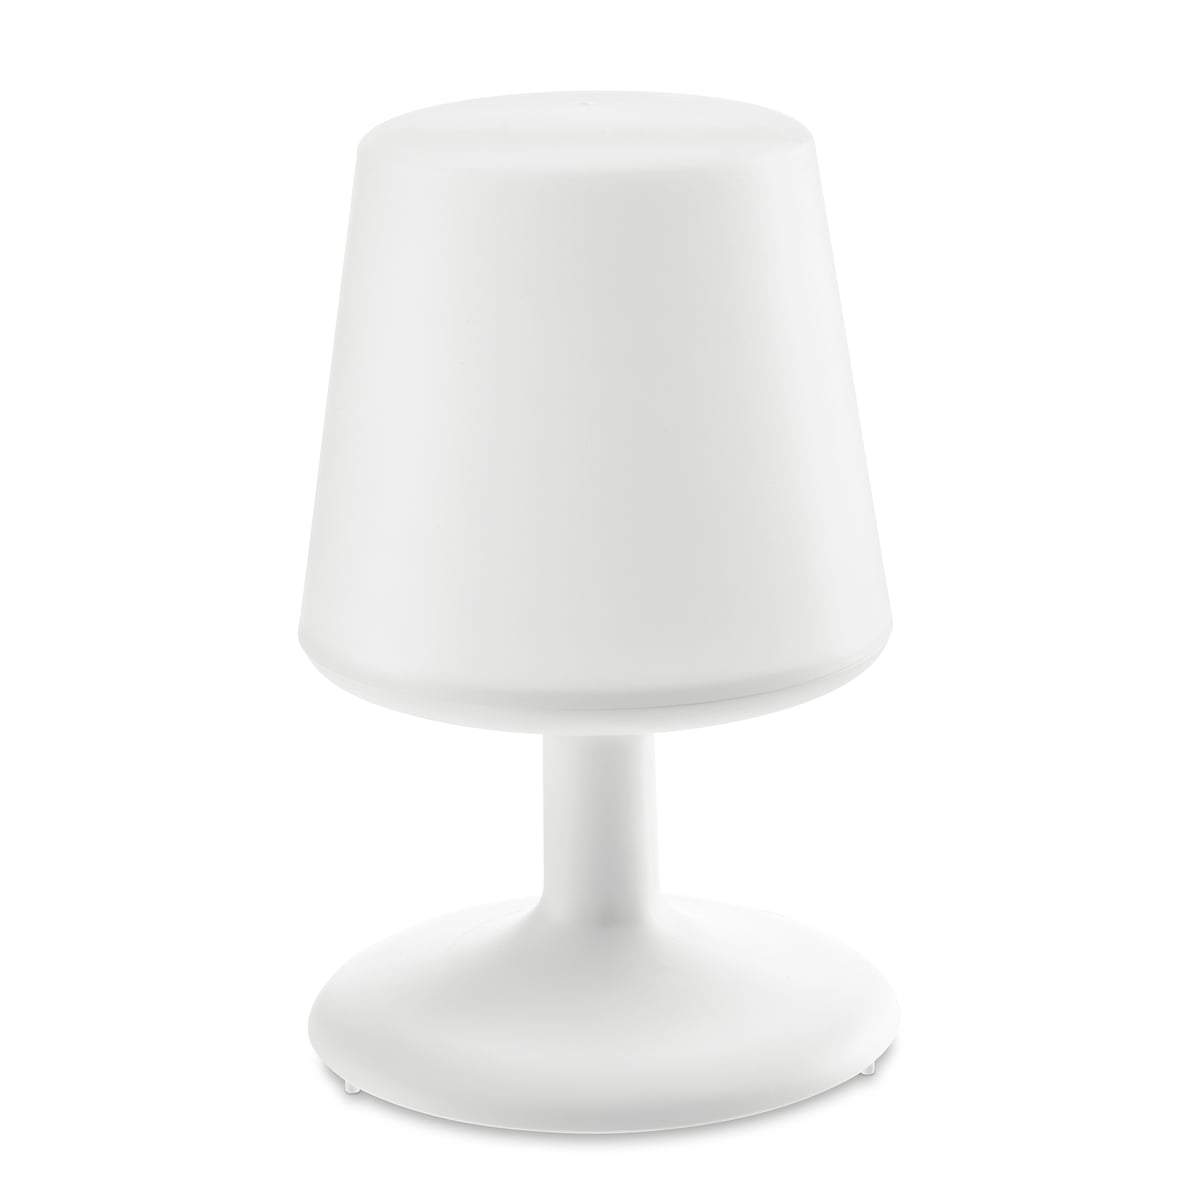 Light To Go Battery Powered Table Lamp, Can You Get Battery Operated Table Lamps